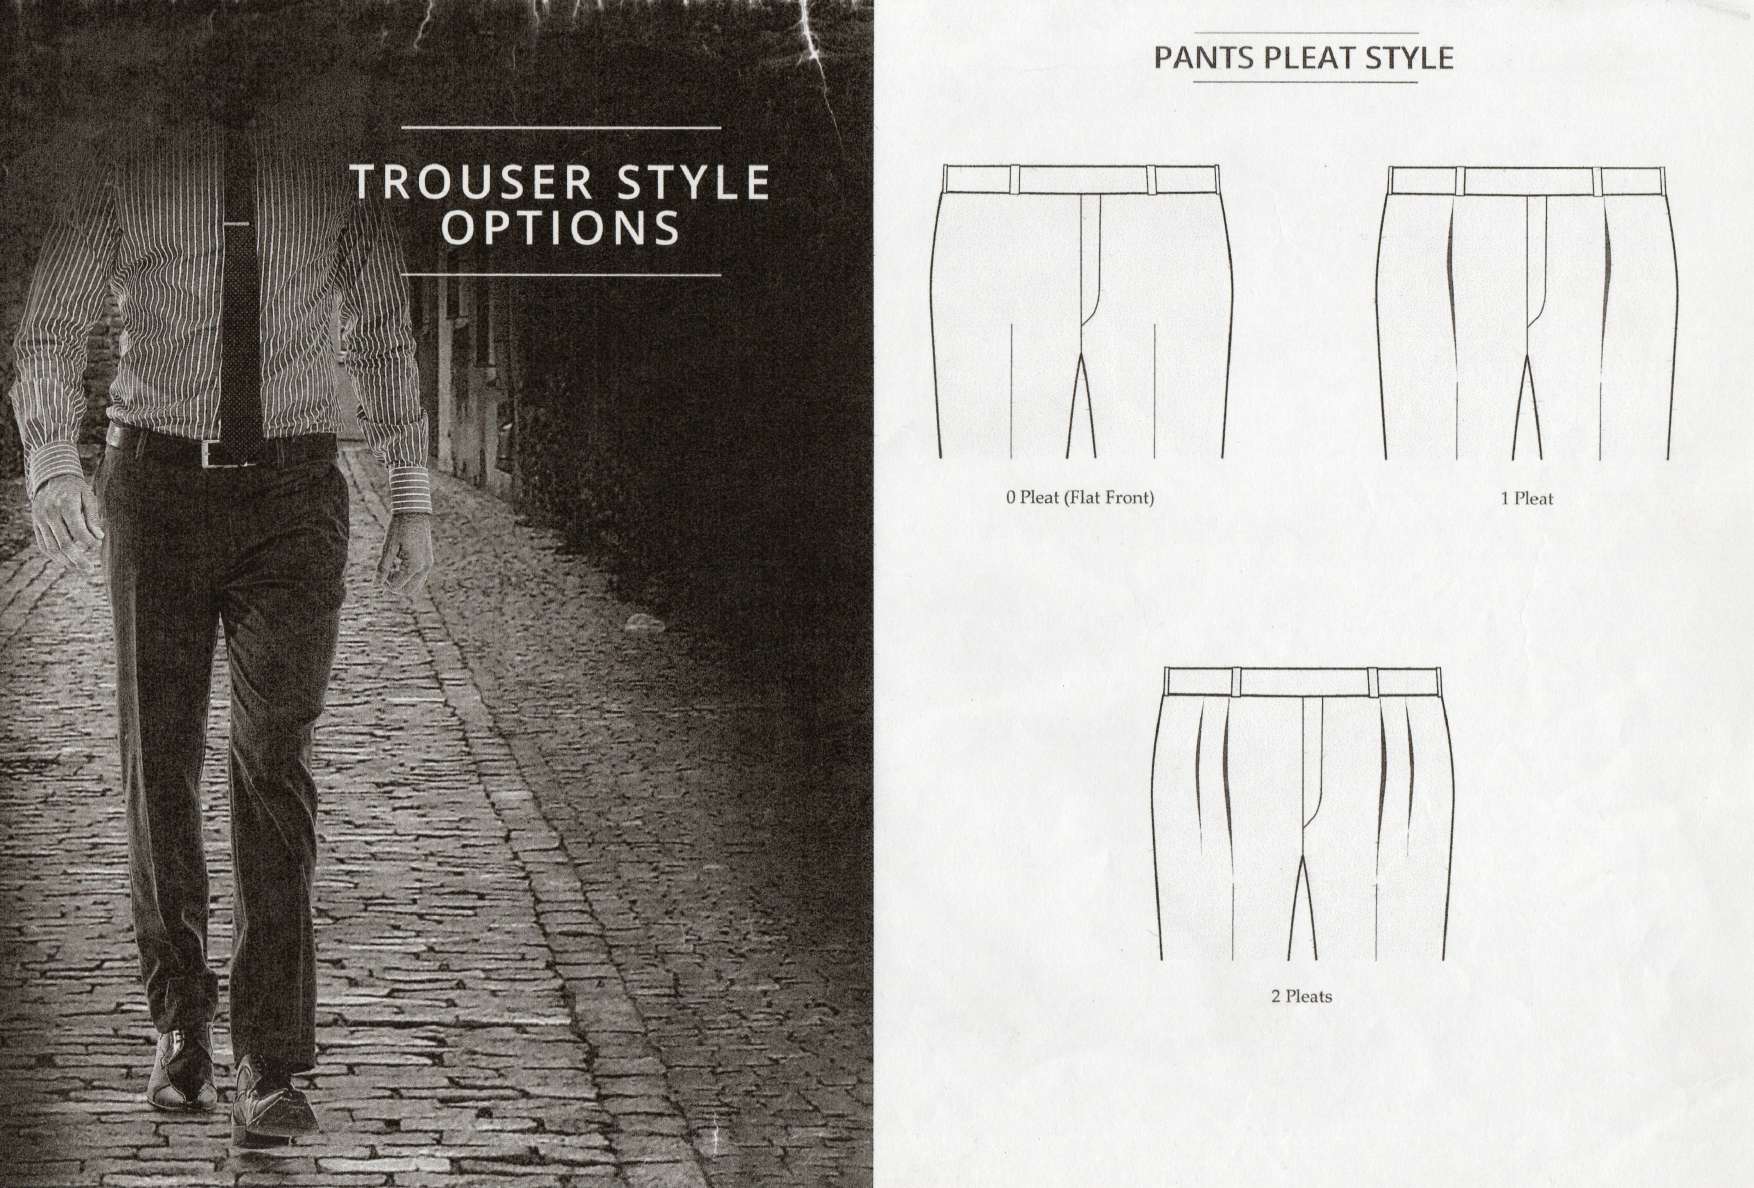 Trouser Style Options